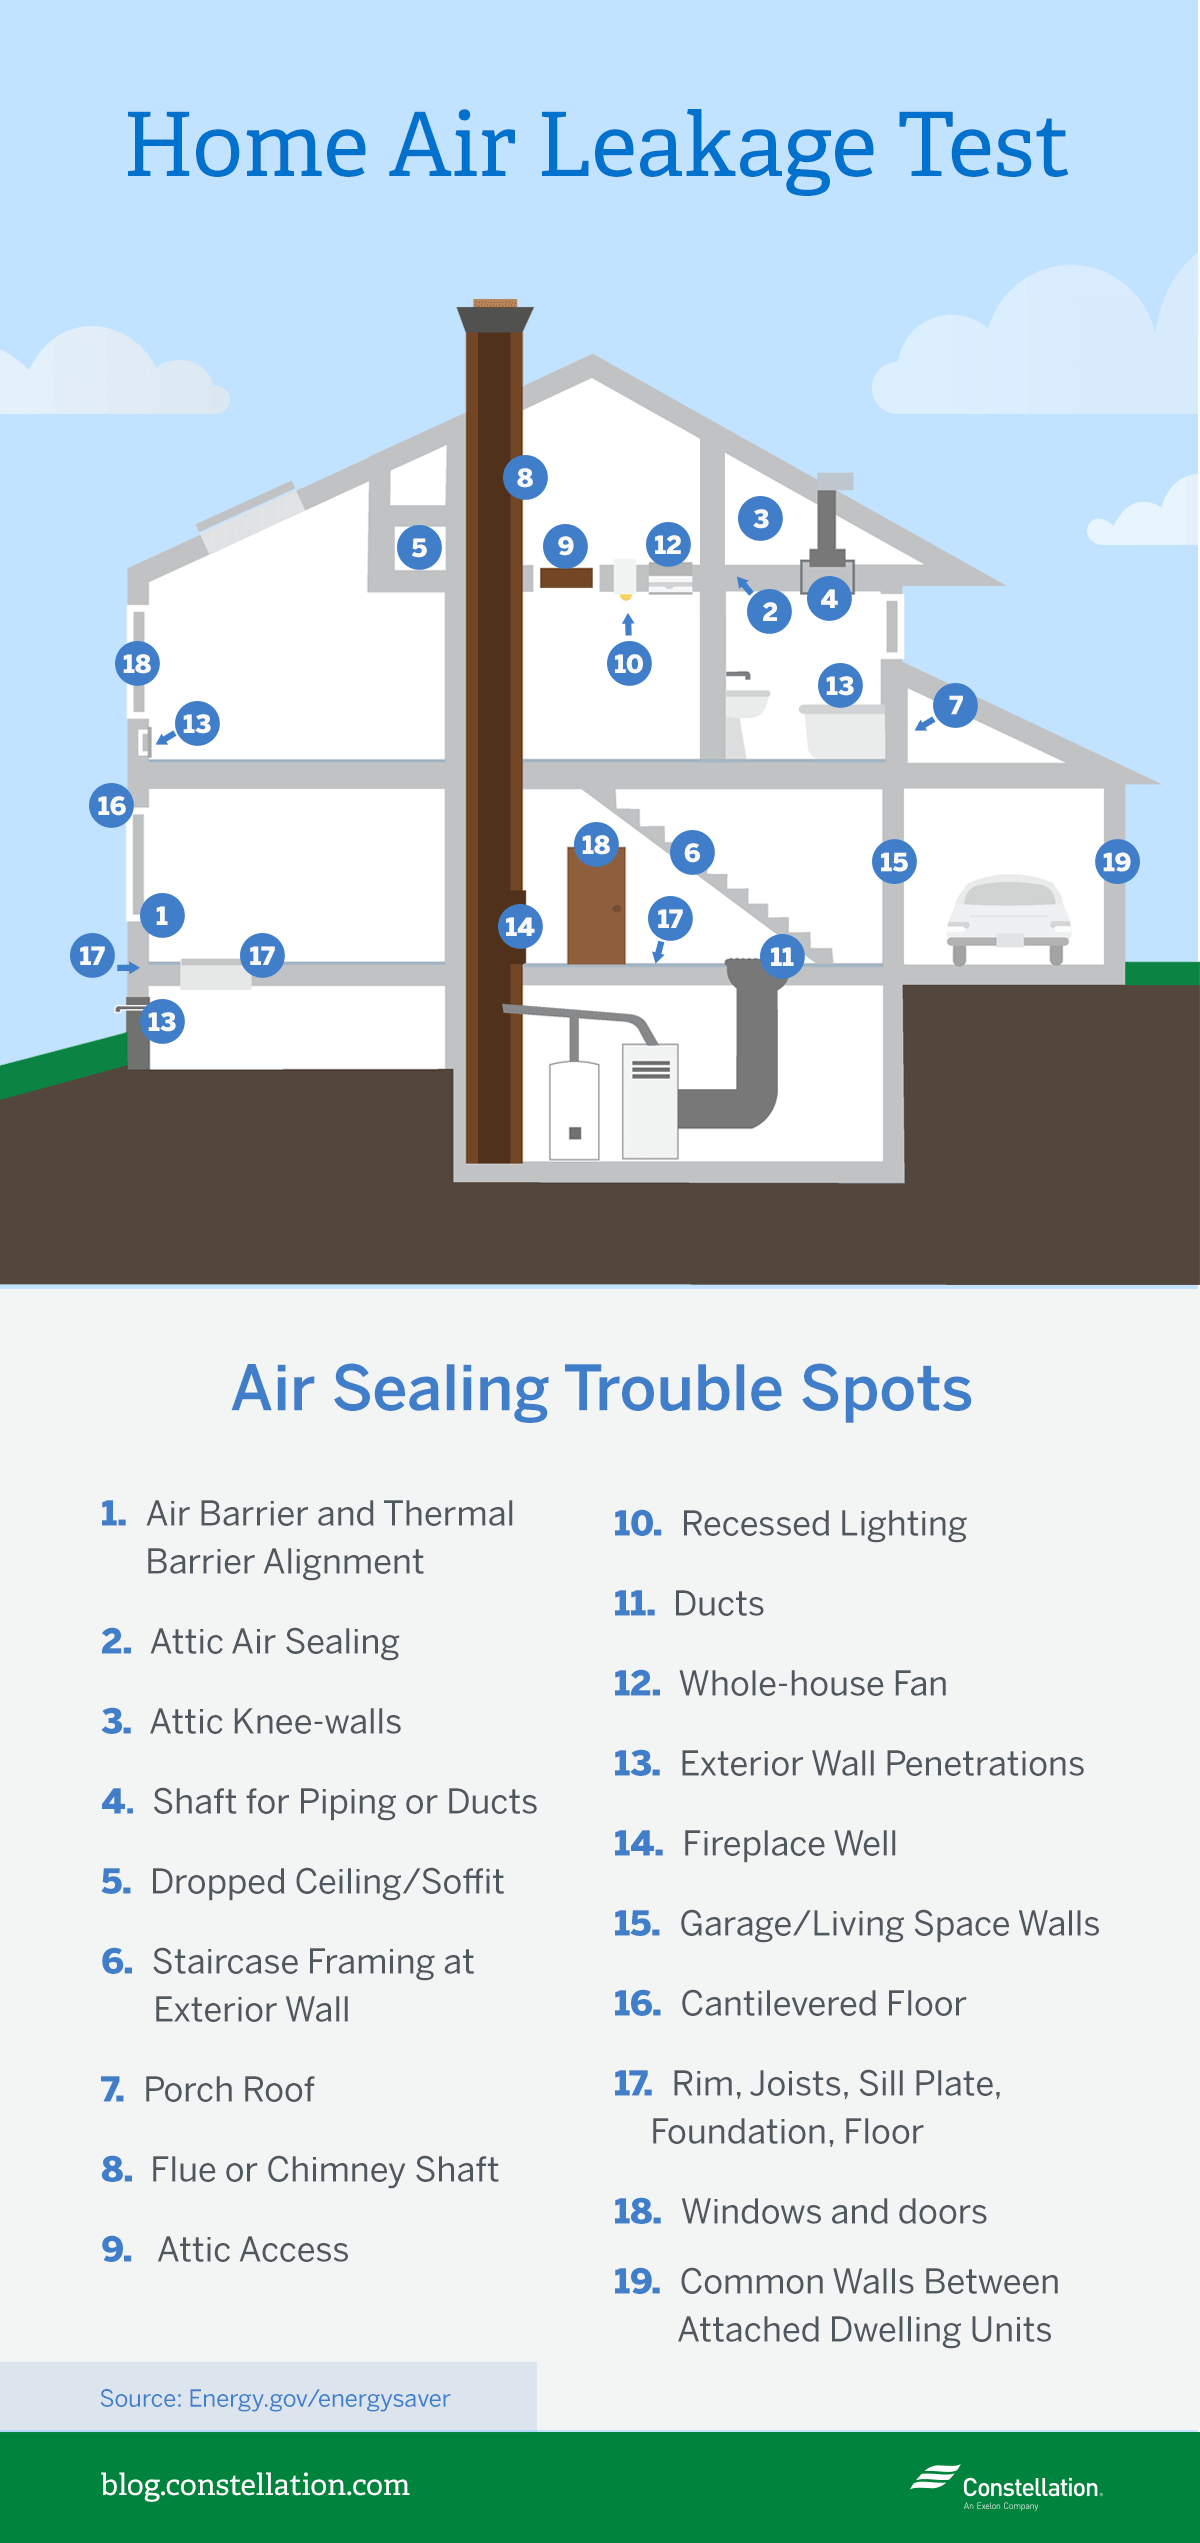 Home Air Leakage Test: Air Sealing Trouble Spots